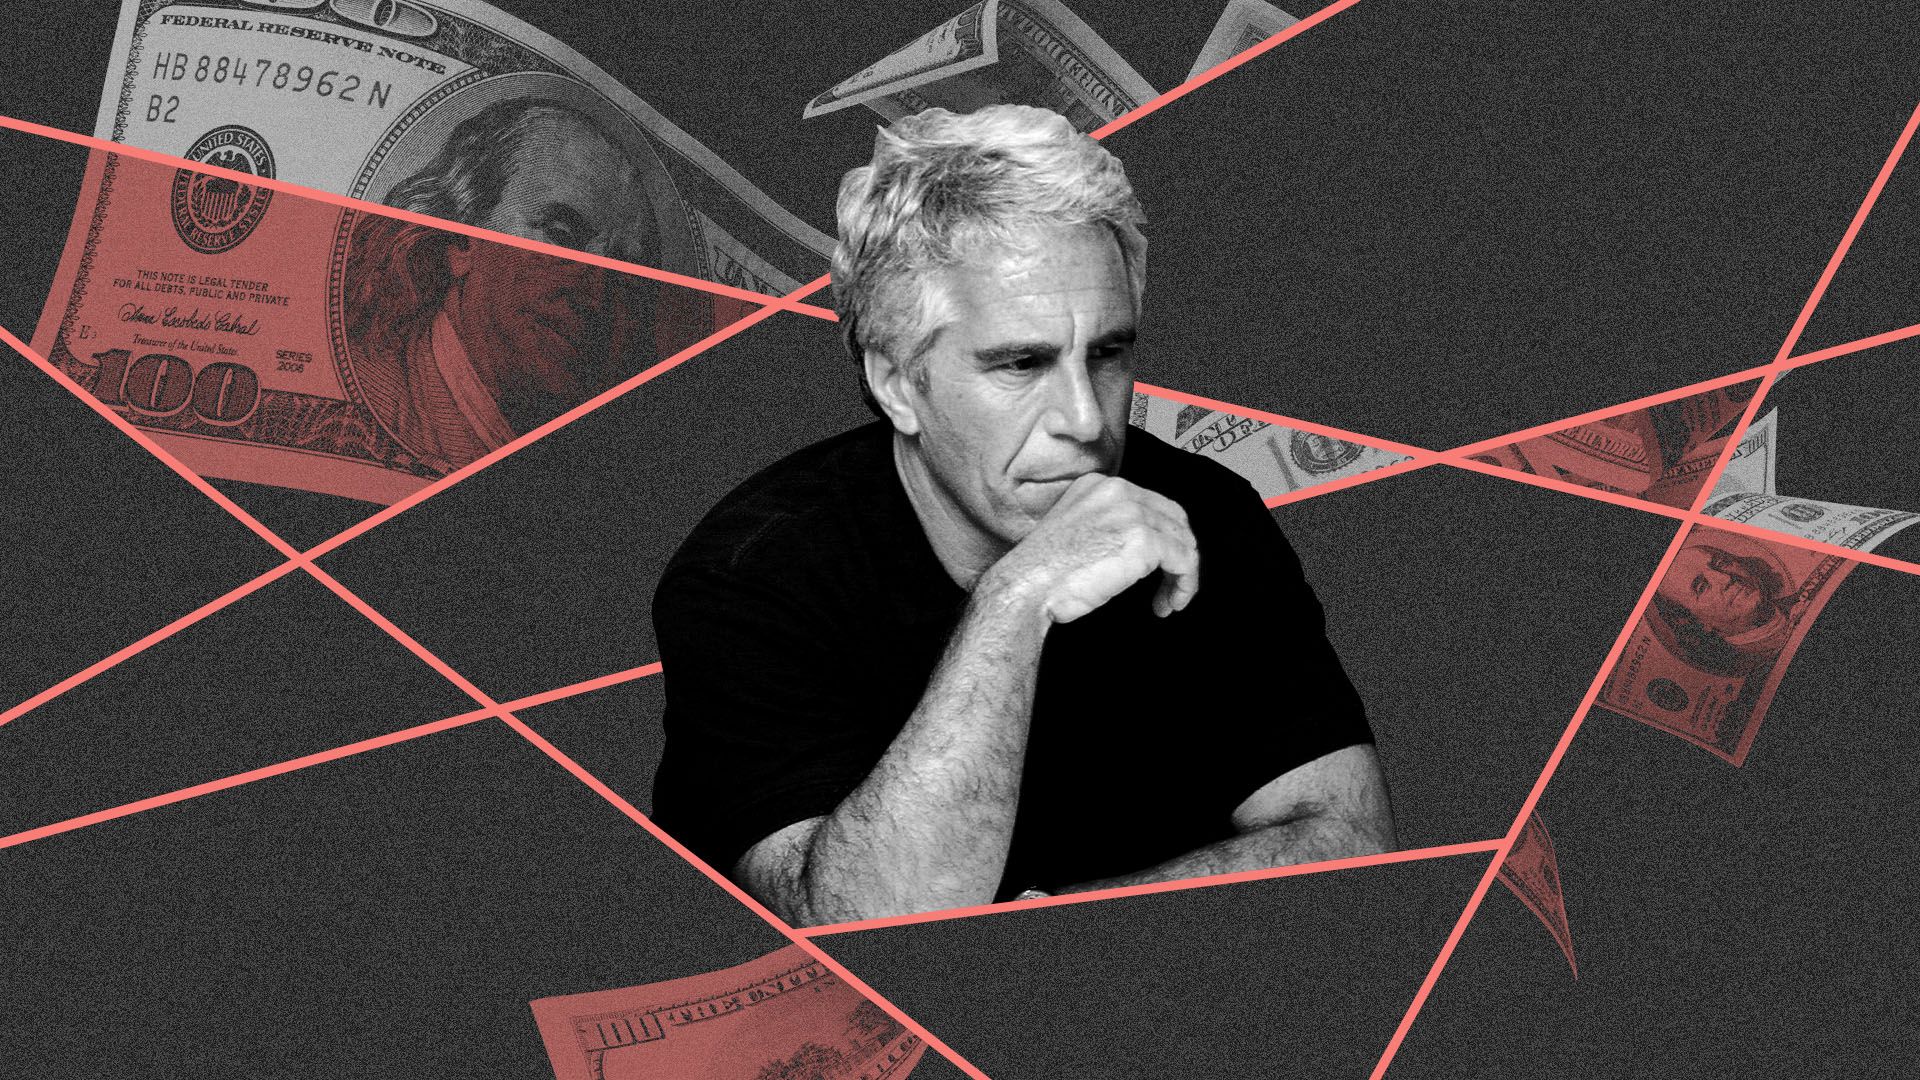 In this illustration, Jeffrey Epstein is surrounded by money